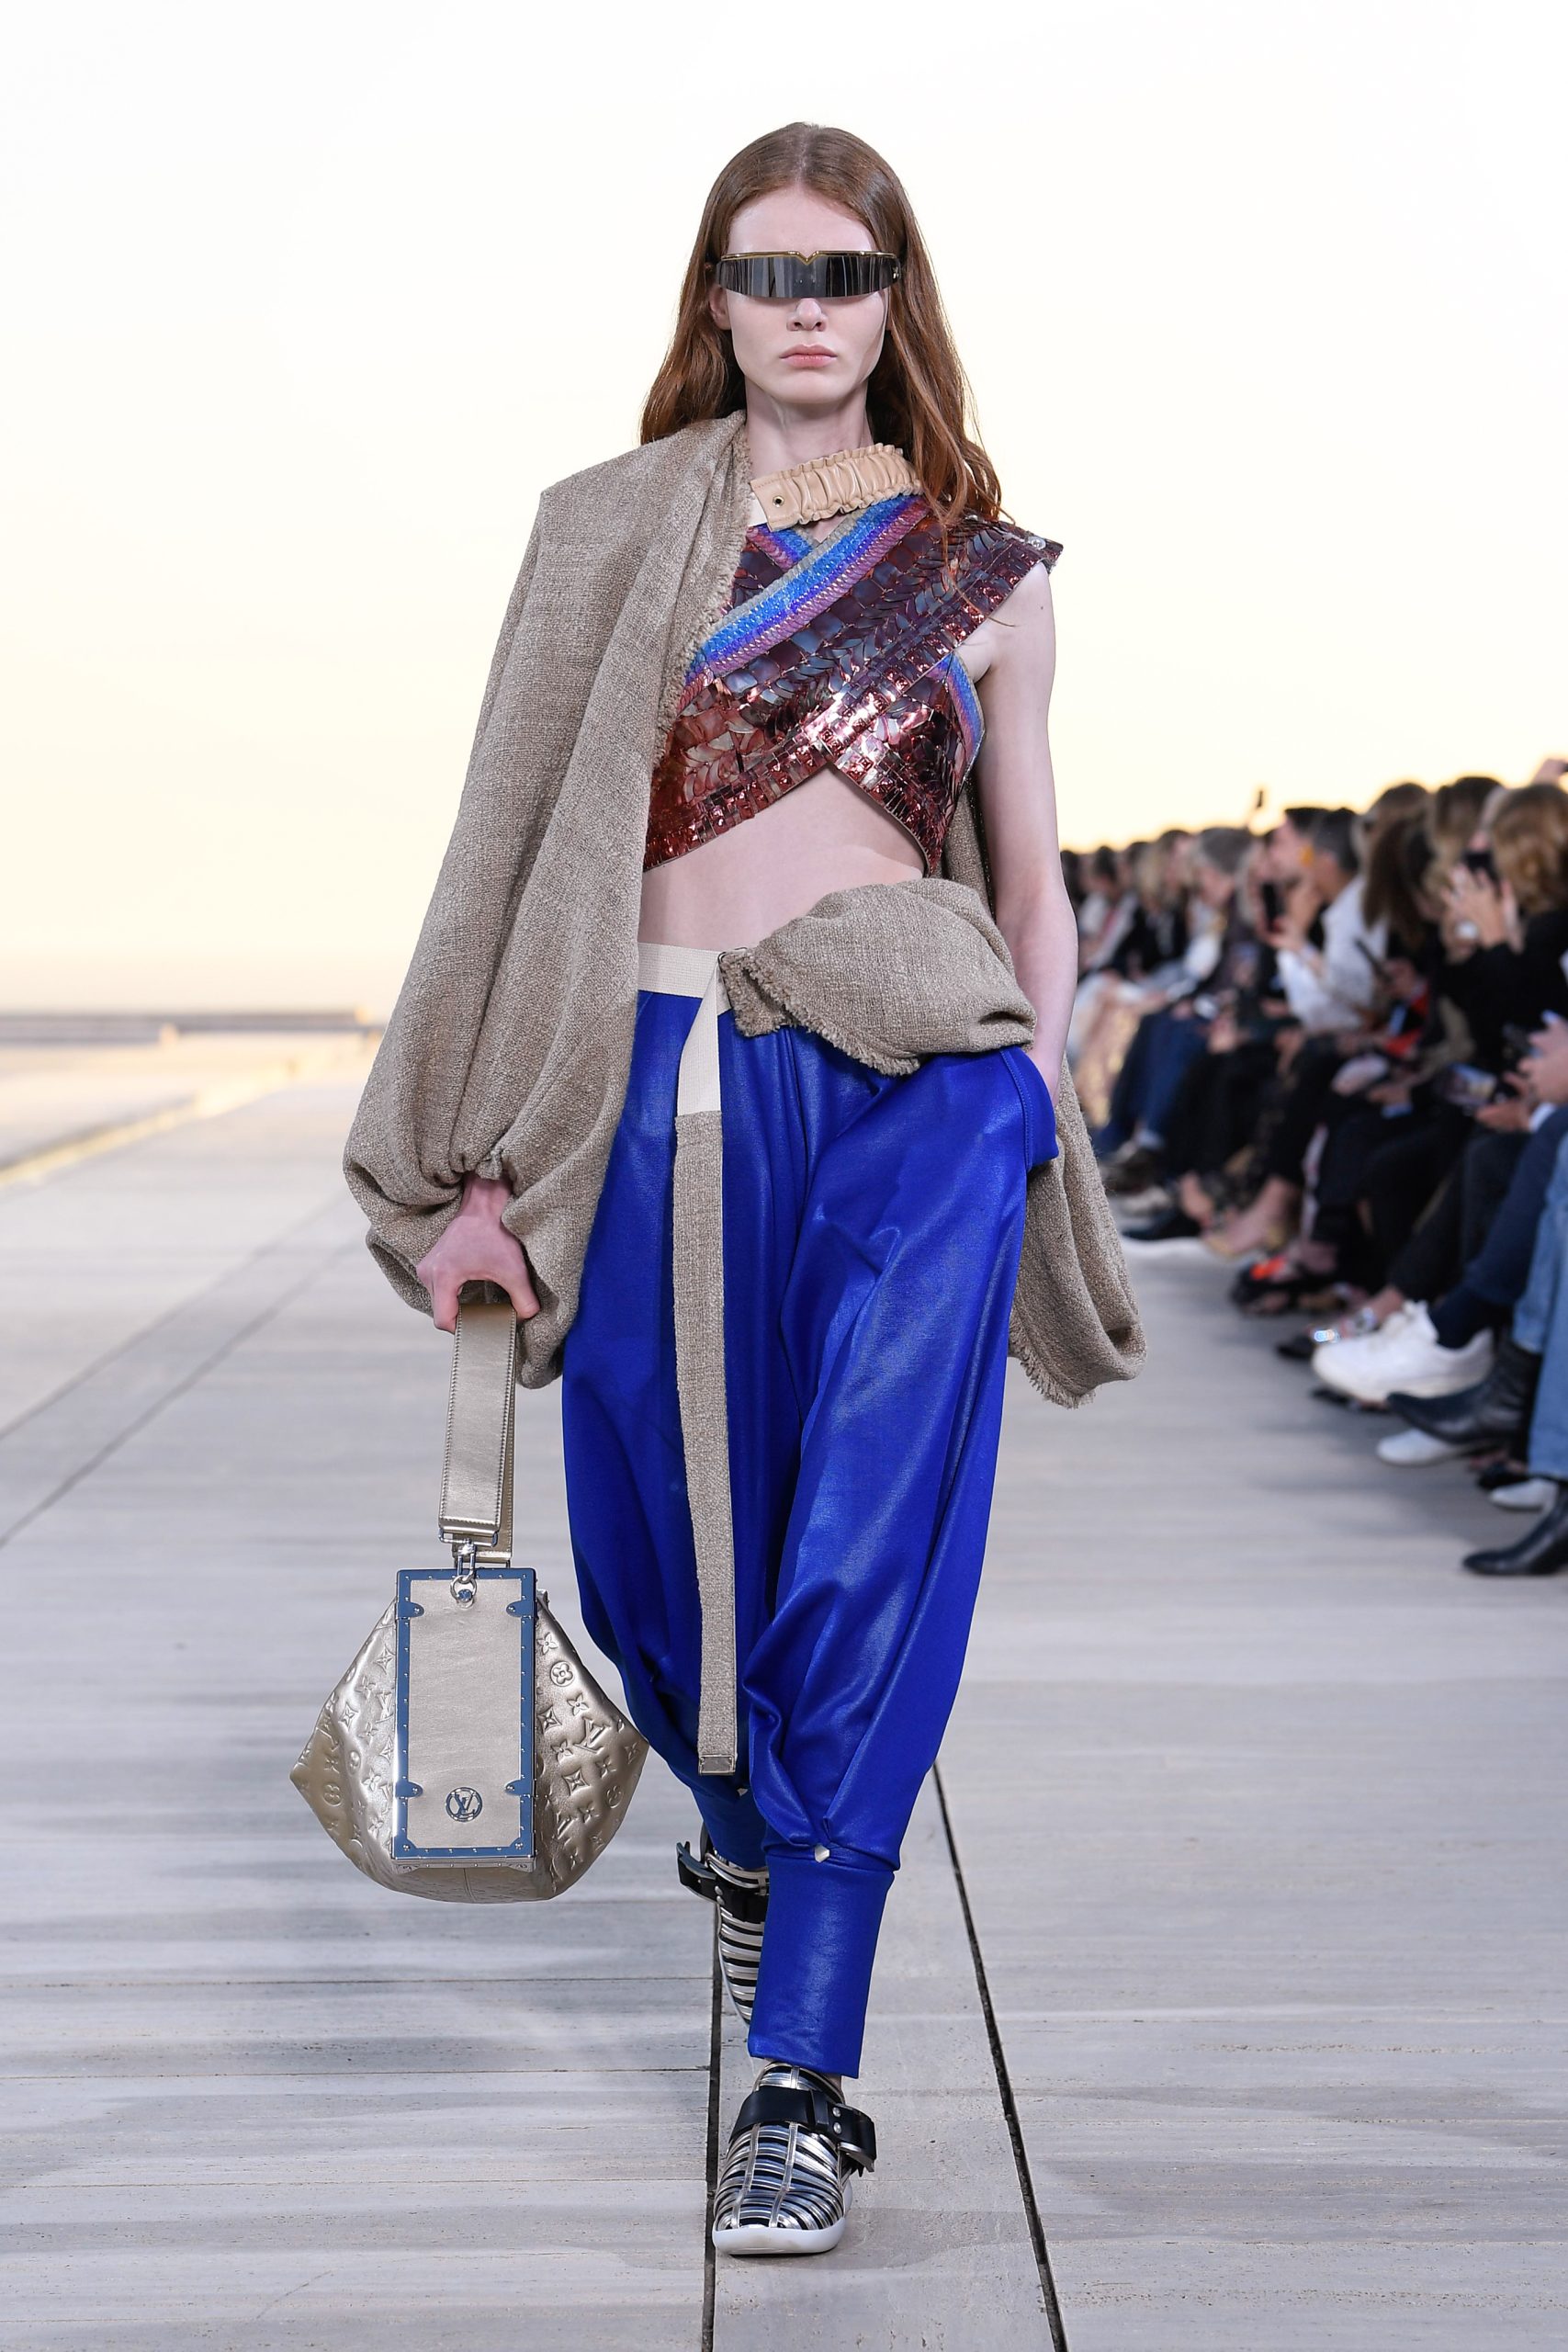 Glass reviews the Louis Vuitton Cruise 2023 collection - The Glass Magazine